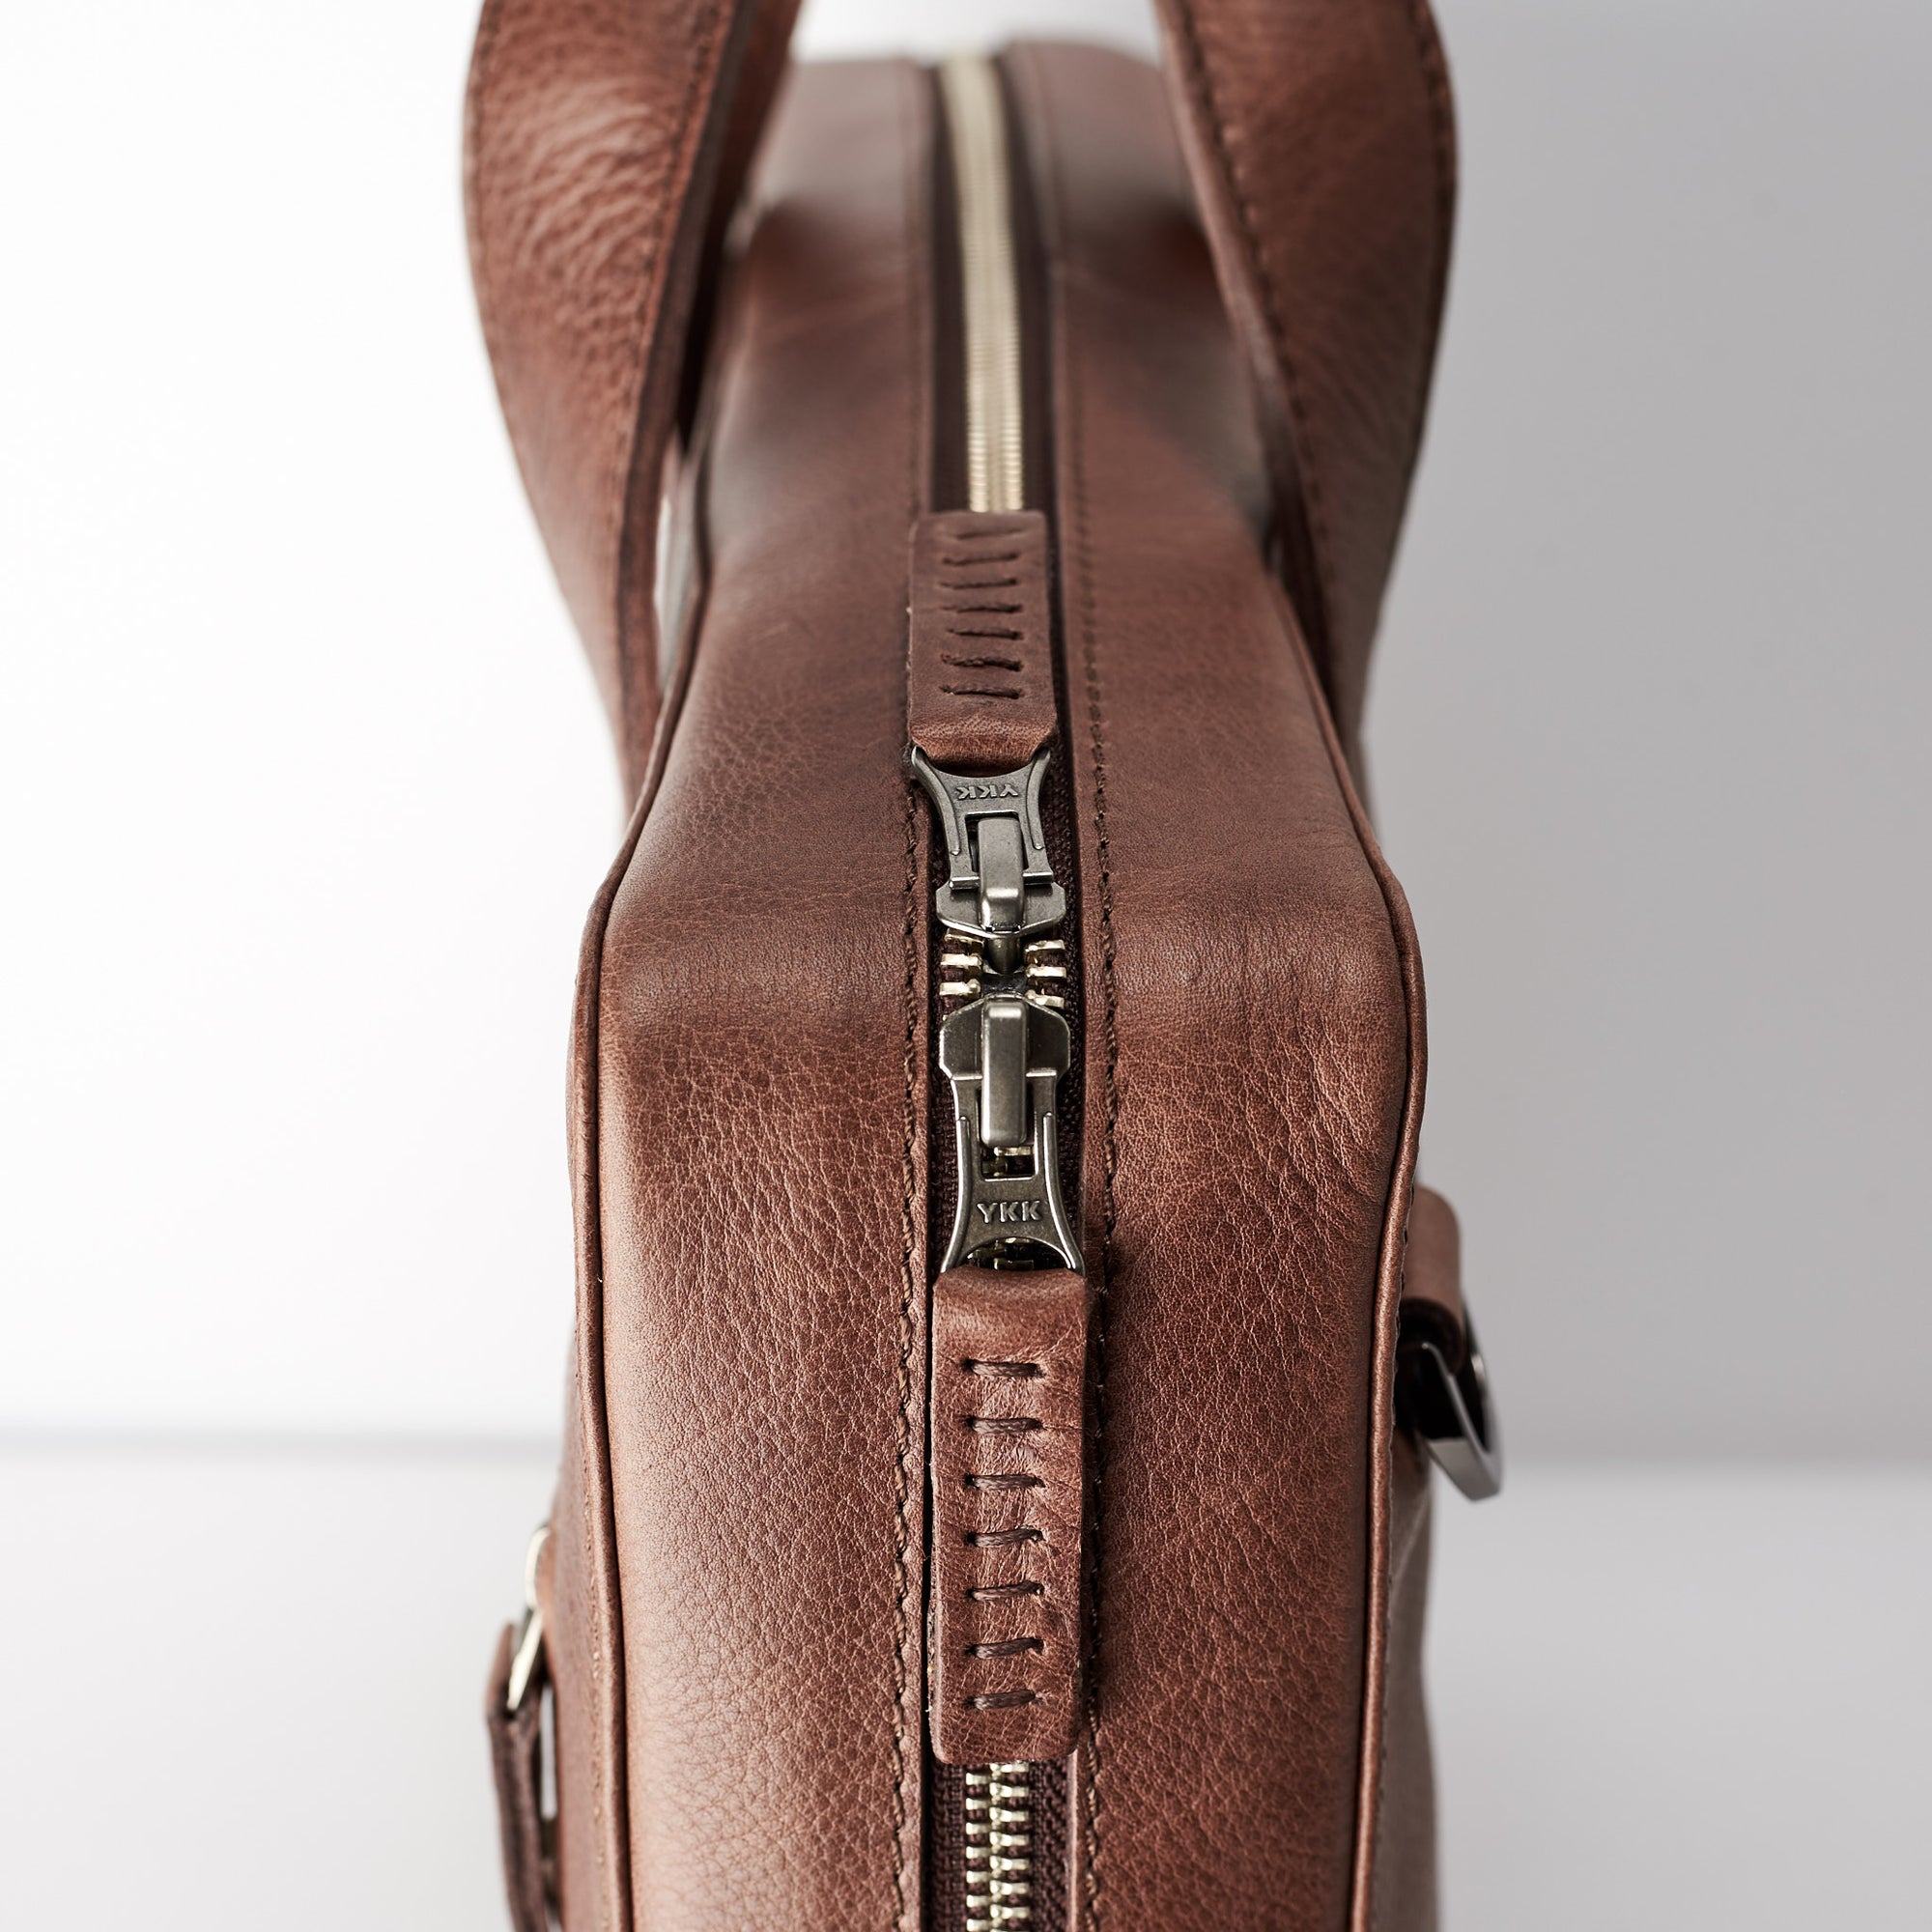 YKK zipper detail. Brown leather briefcase for mens gifts. Custom office bag